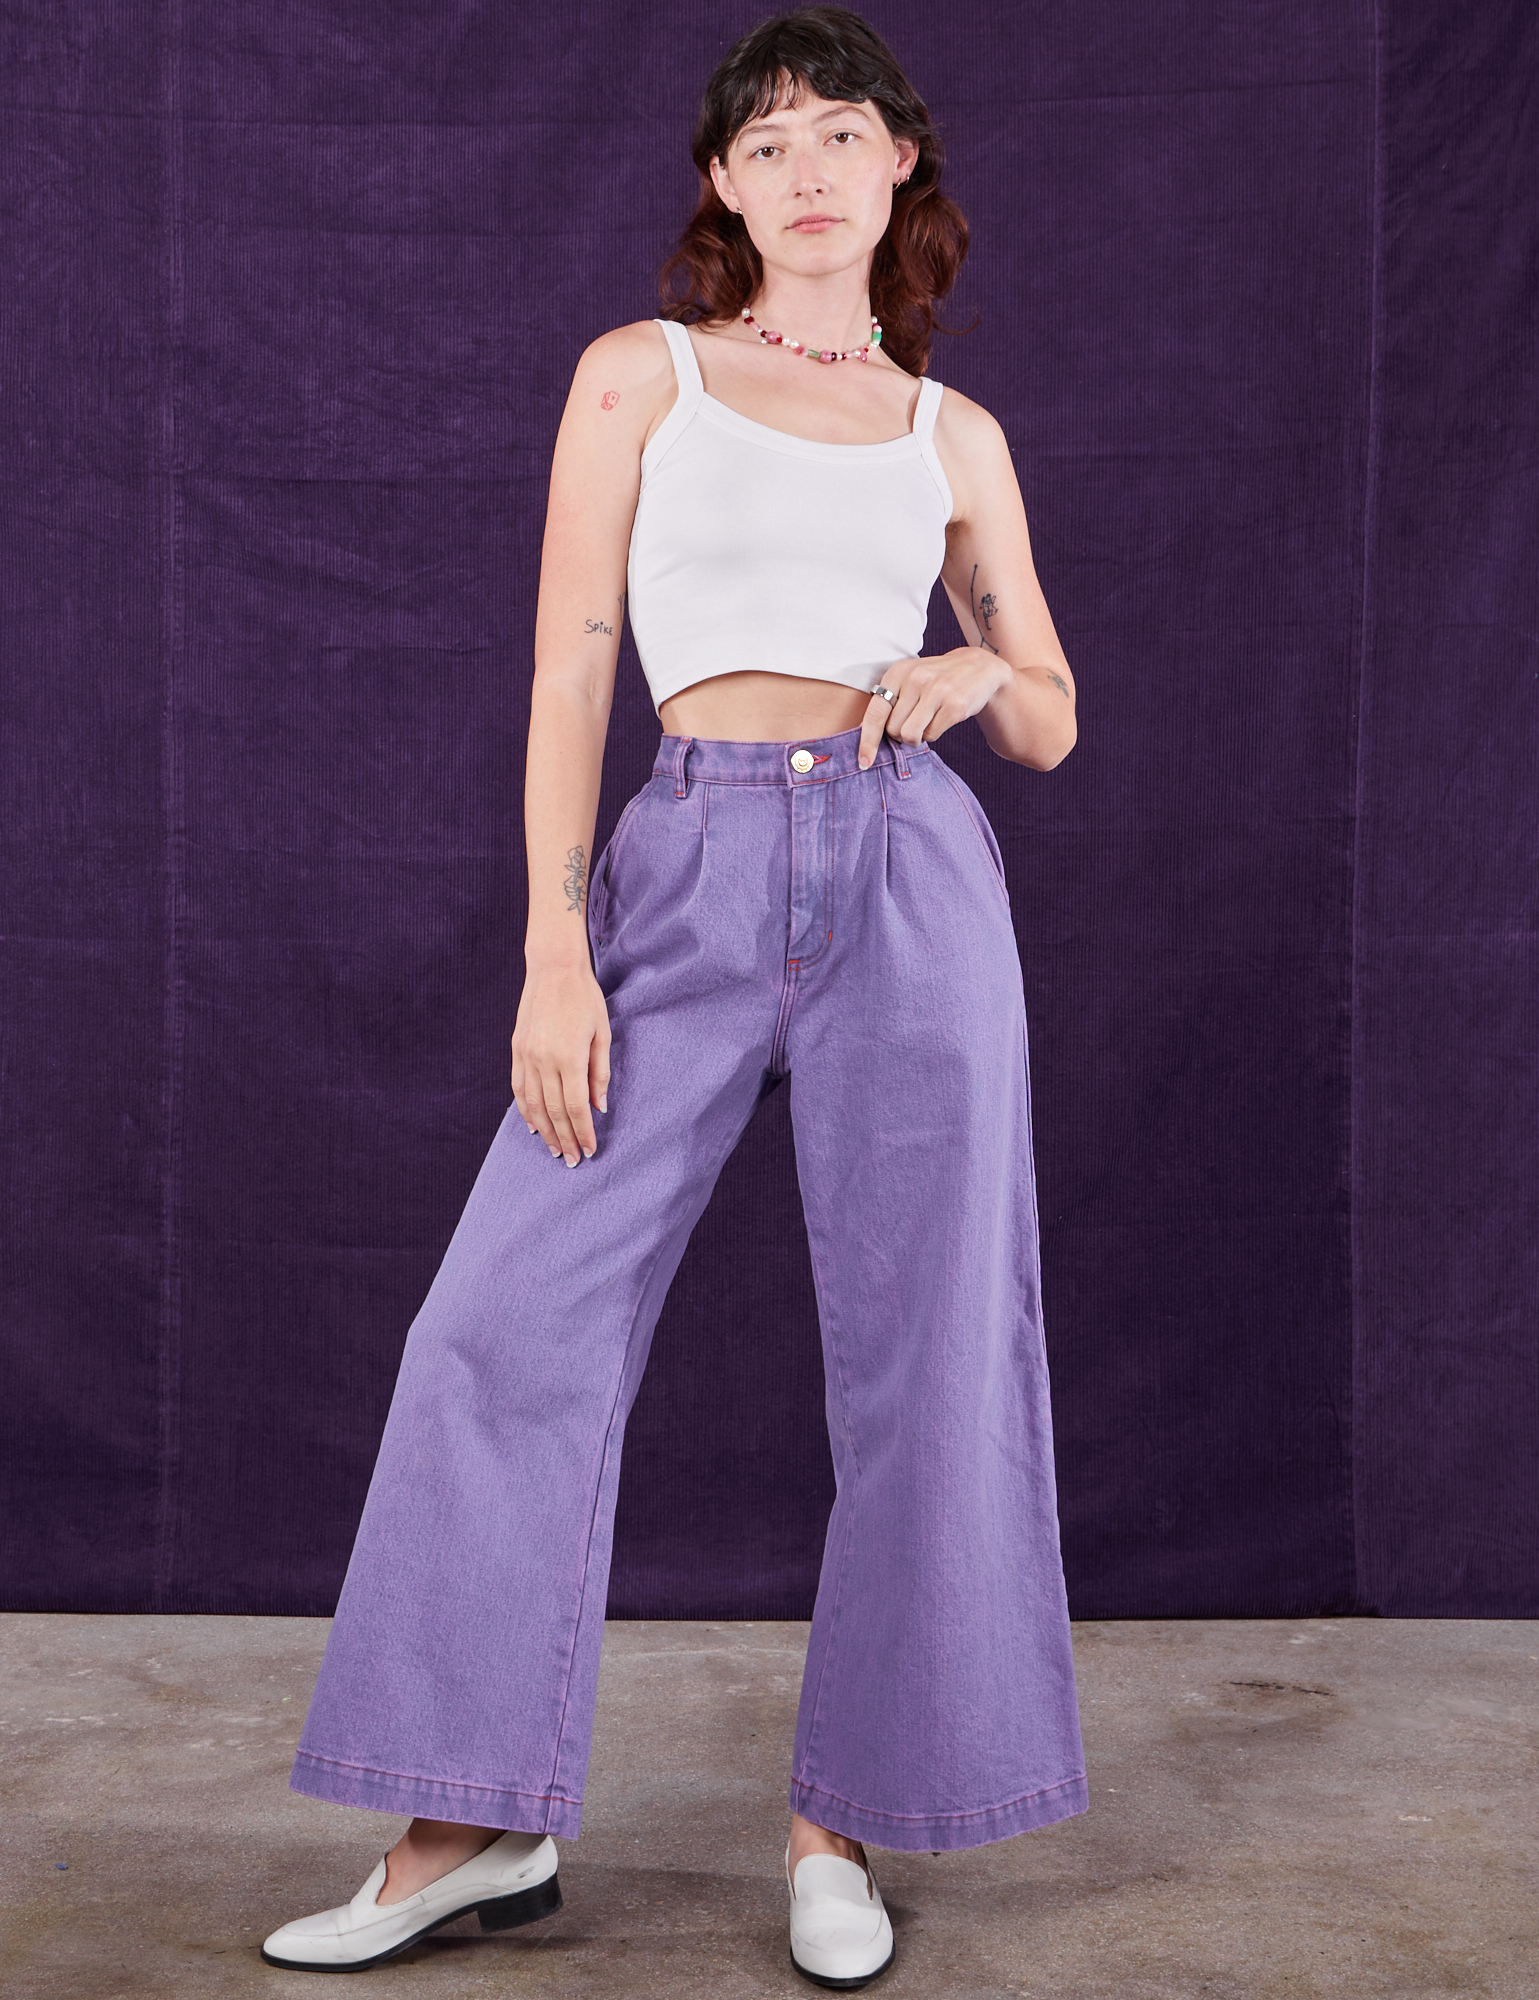 Alex is 5'8" and wearing XXS Overdyed Wide Leg Trousers in Faded Grape paired with vintage off-white Cami